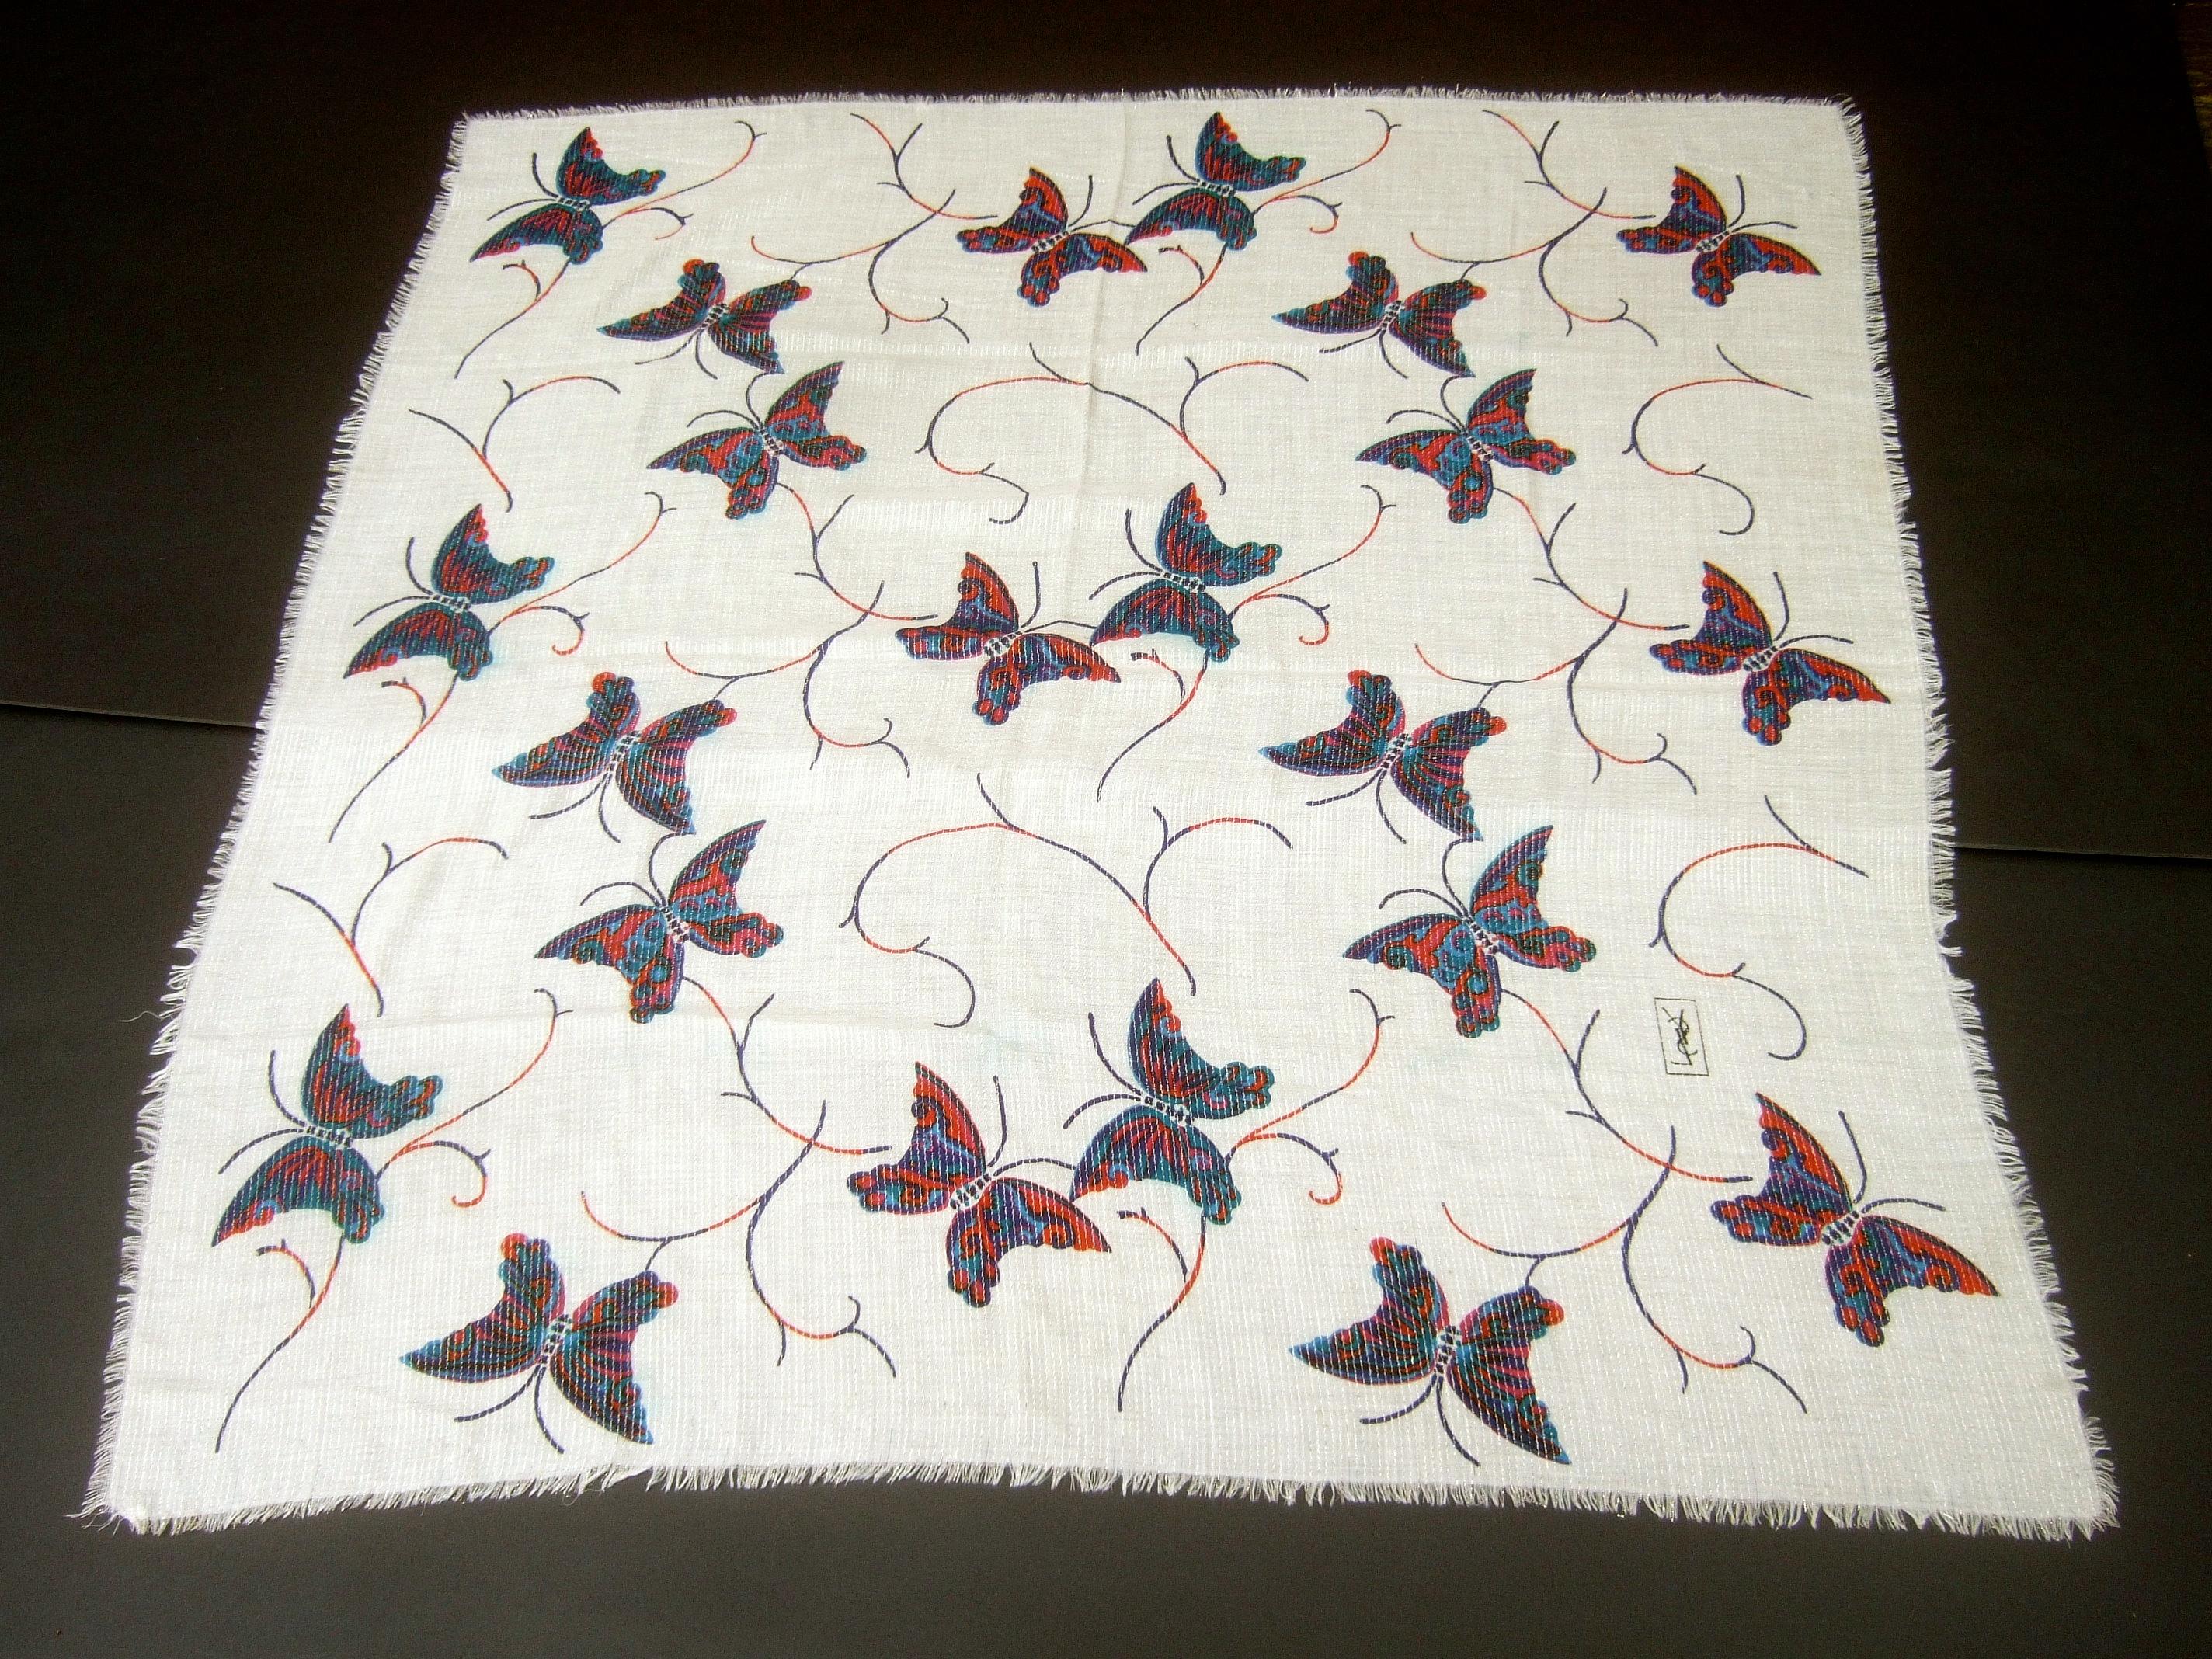 Yves Saint Laurent Large Butterfly Print Scarf - Shawl Wrap 52 x 53 Circa 1970s  8